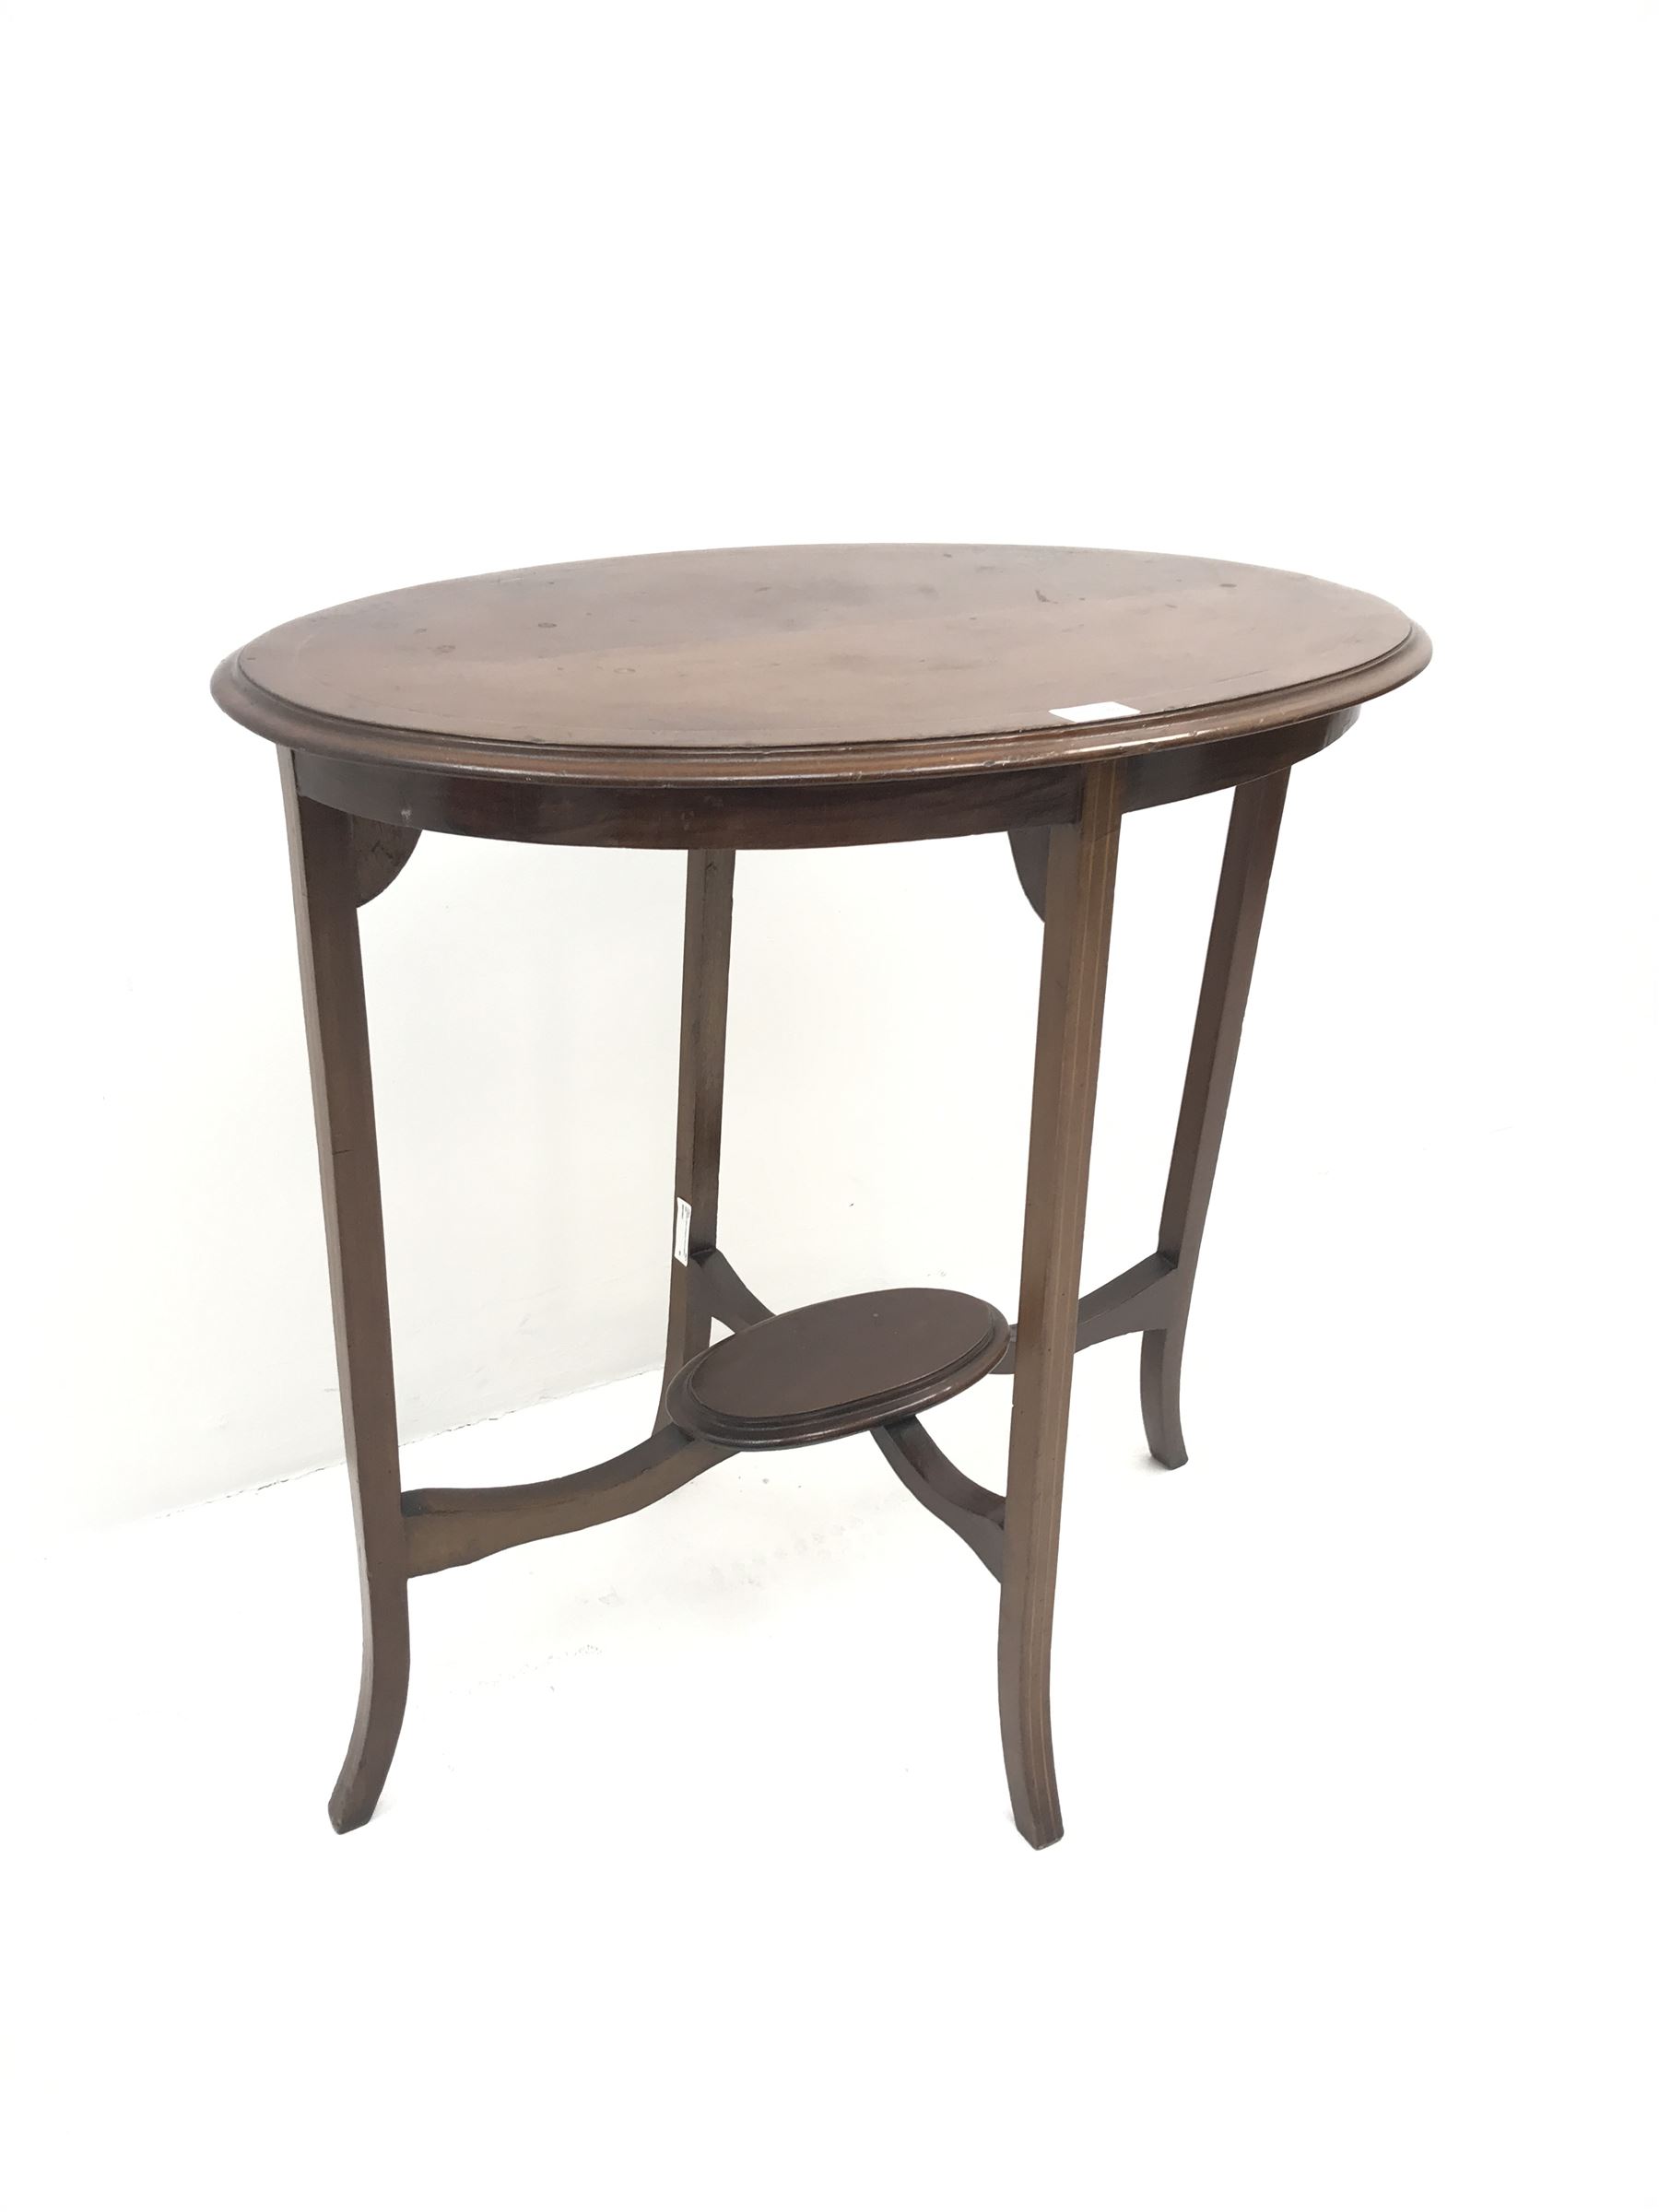 Edwardian inlaid mahogany oval occasional table